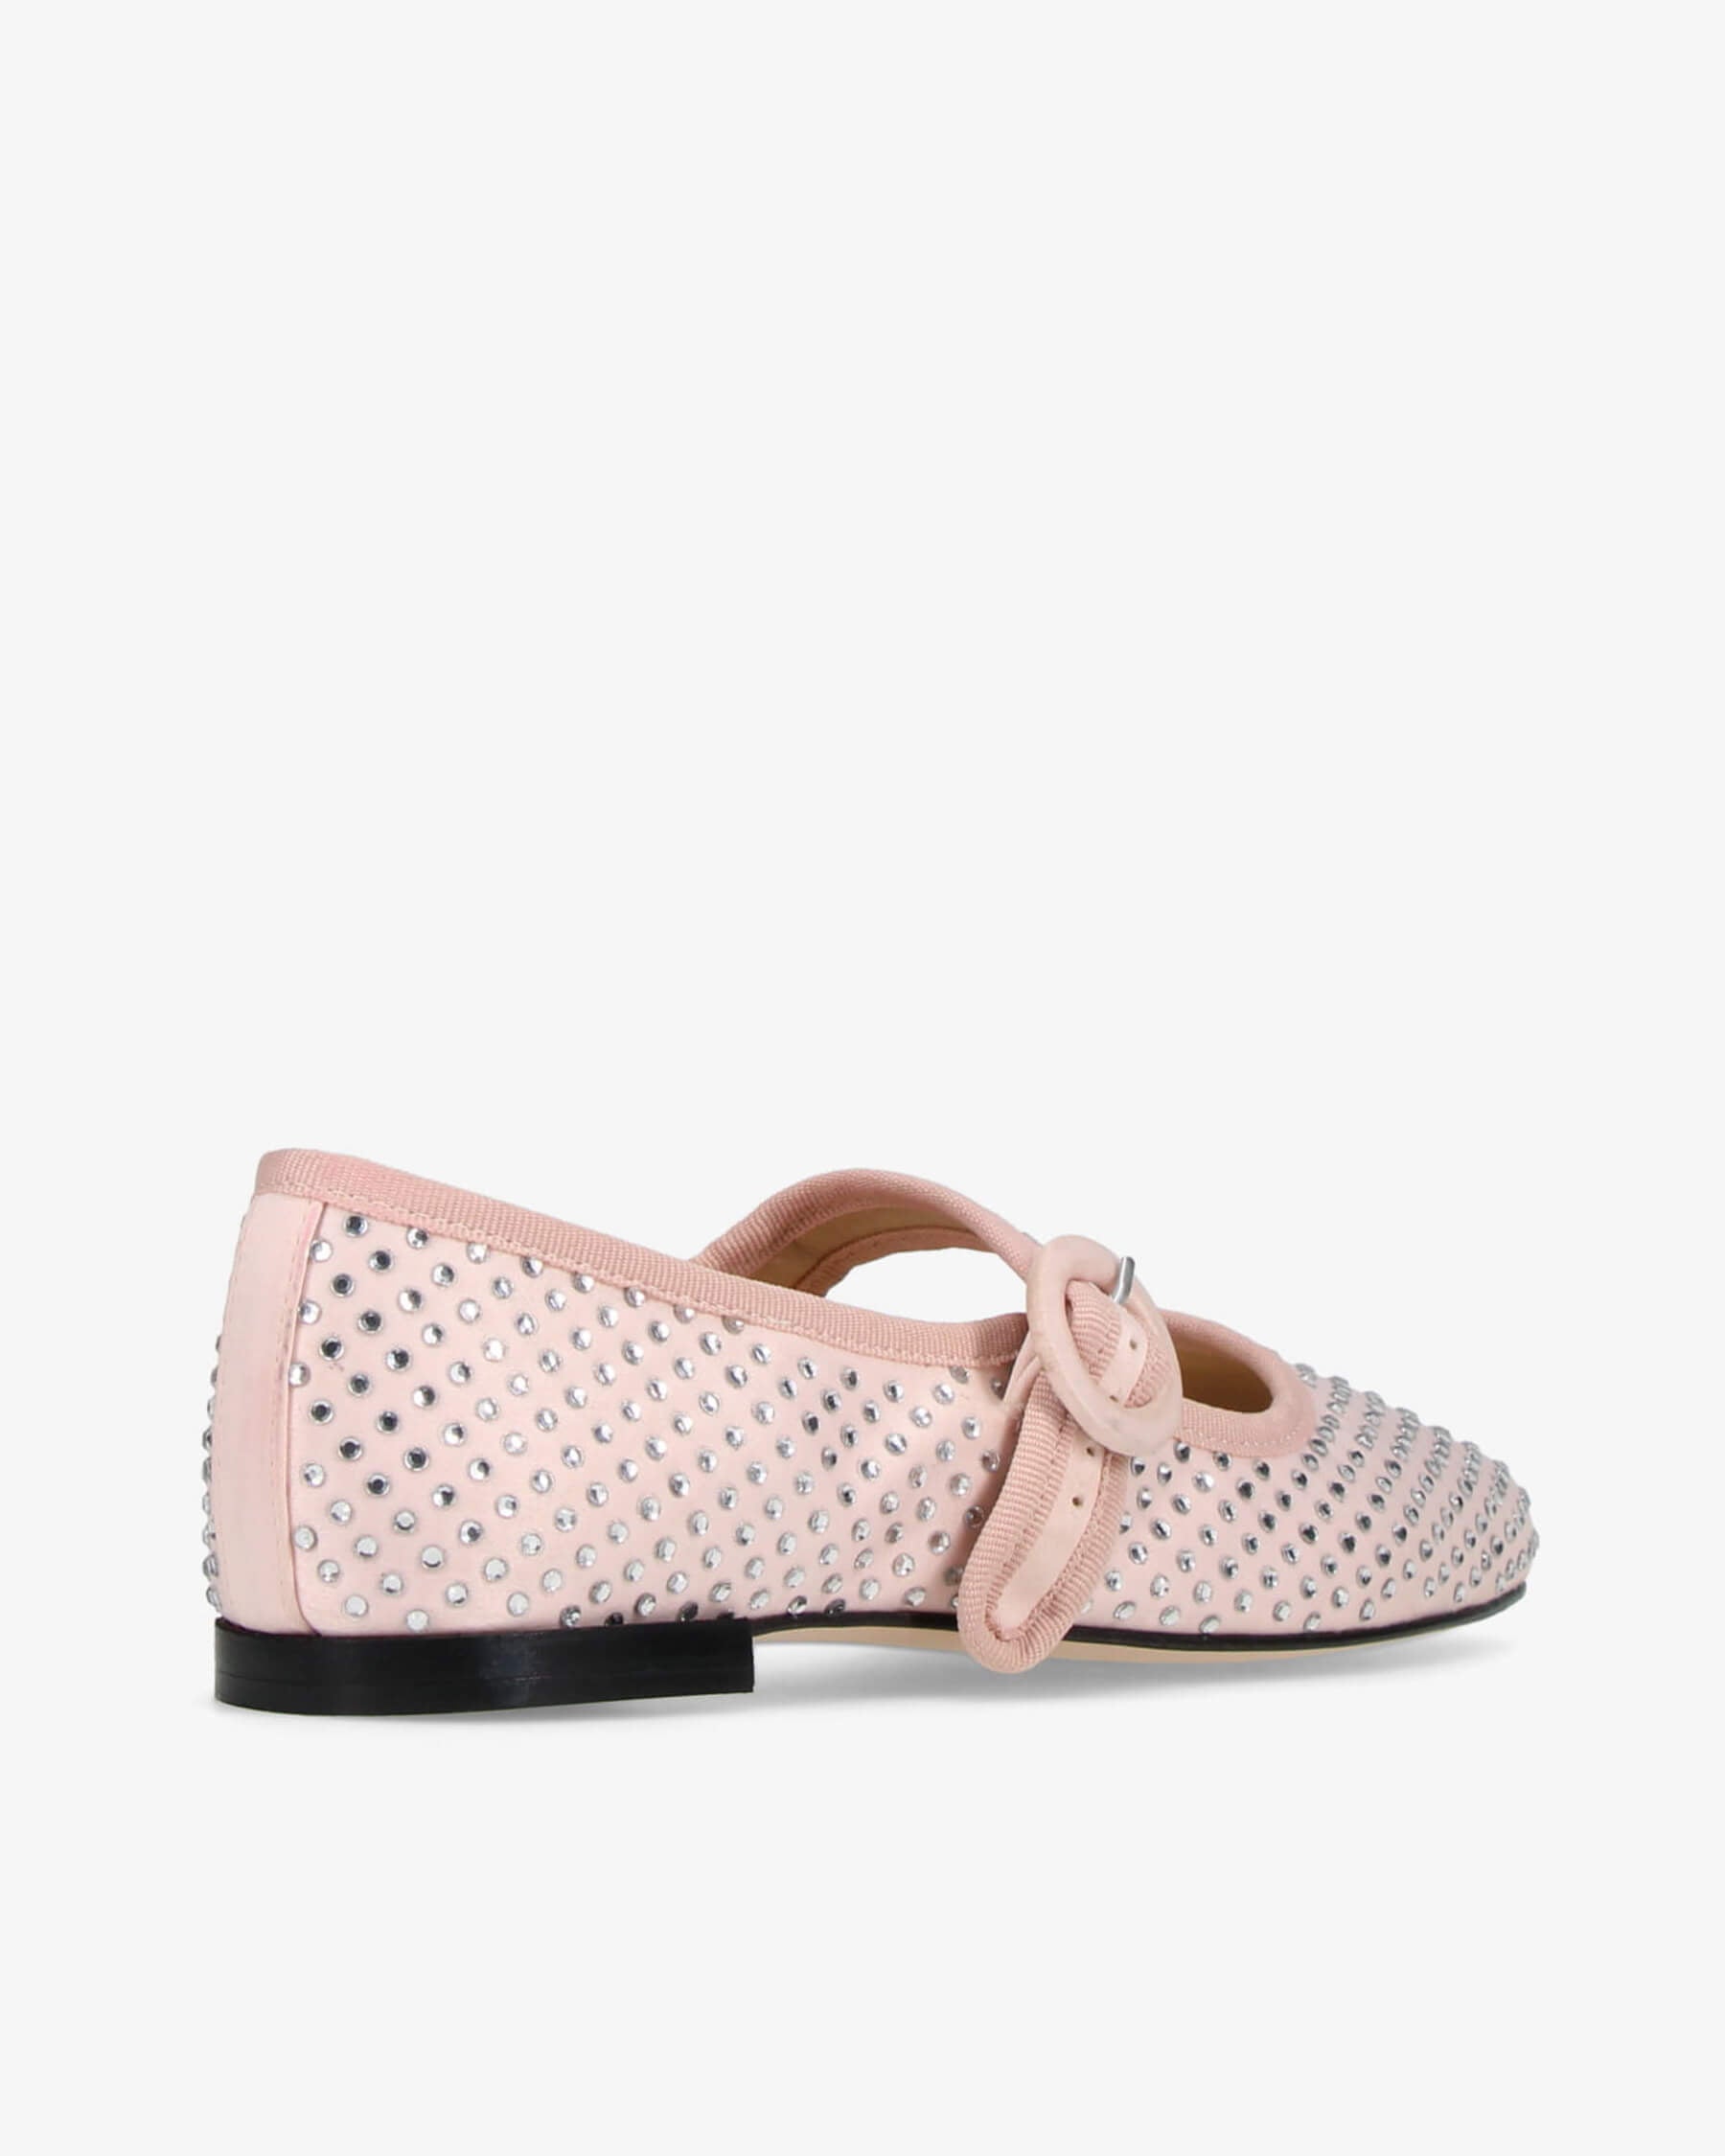 Repetto | Babies